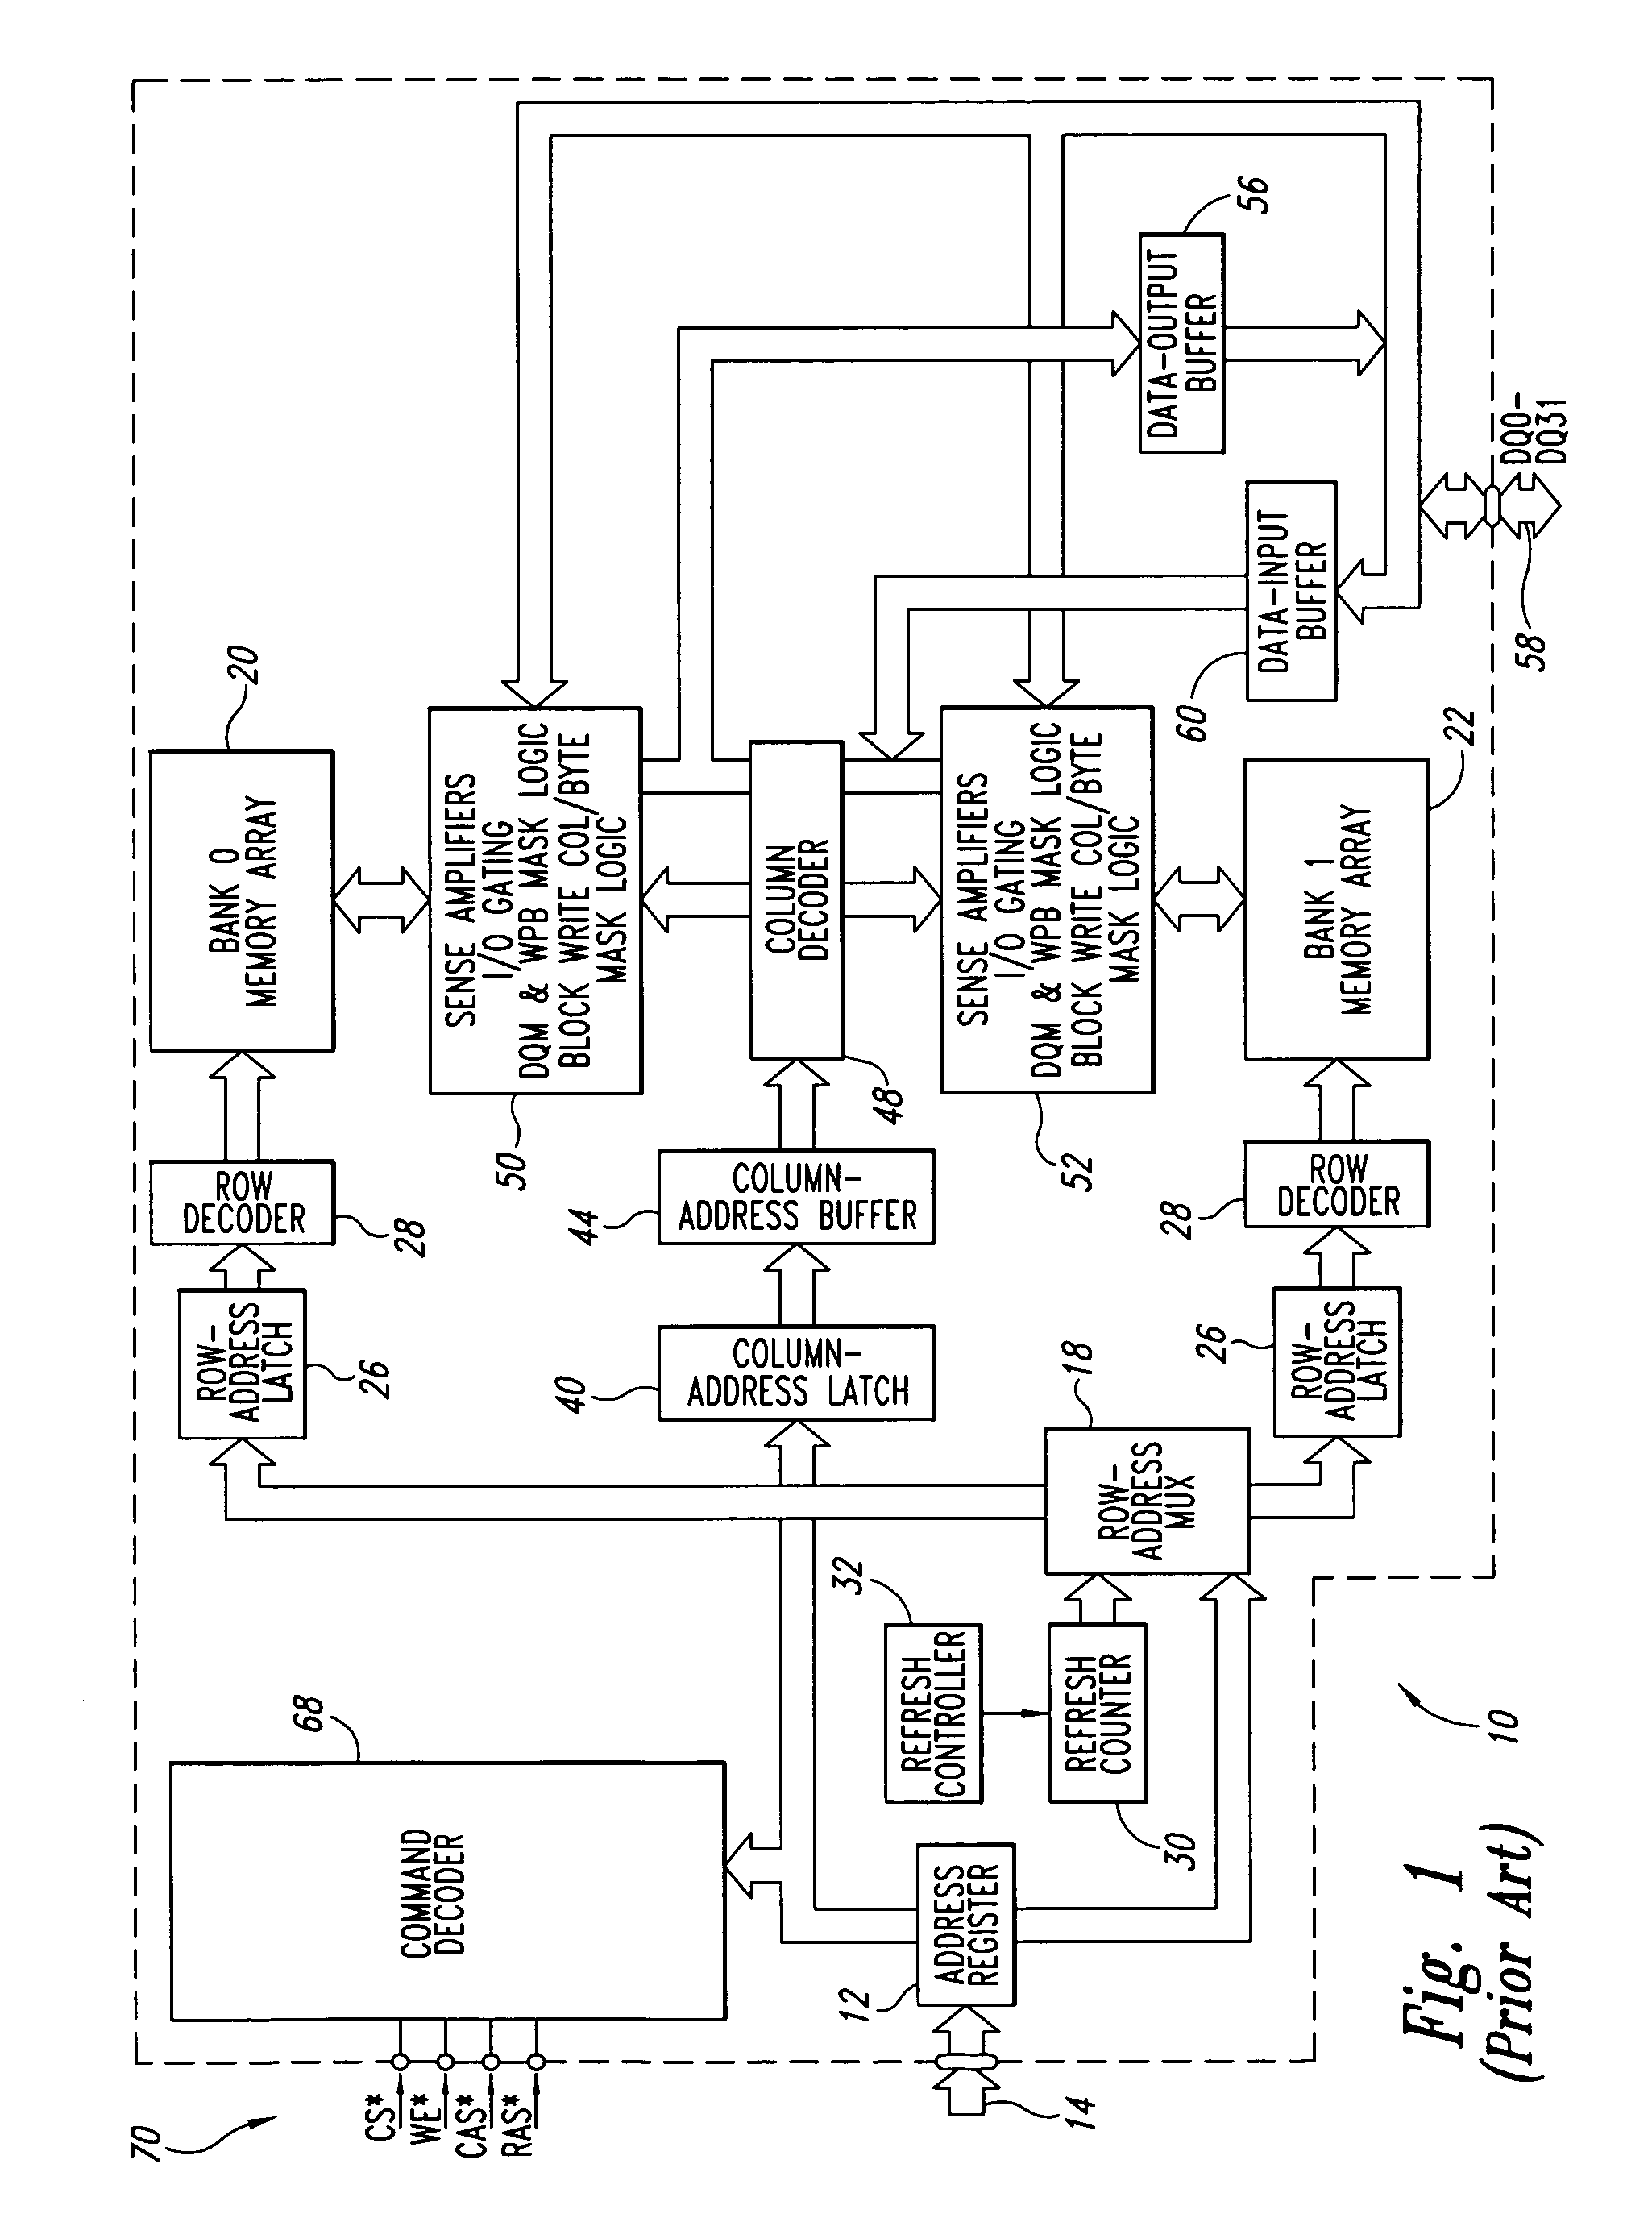 Low voltage data path and current sense amplifier